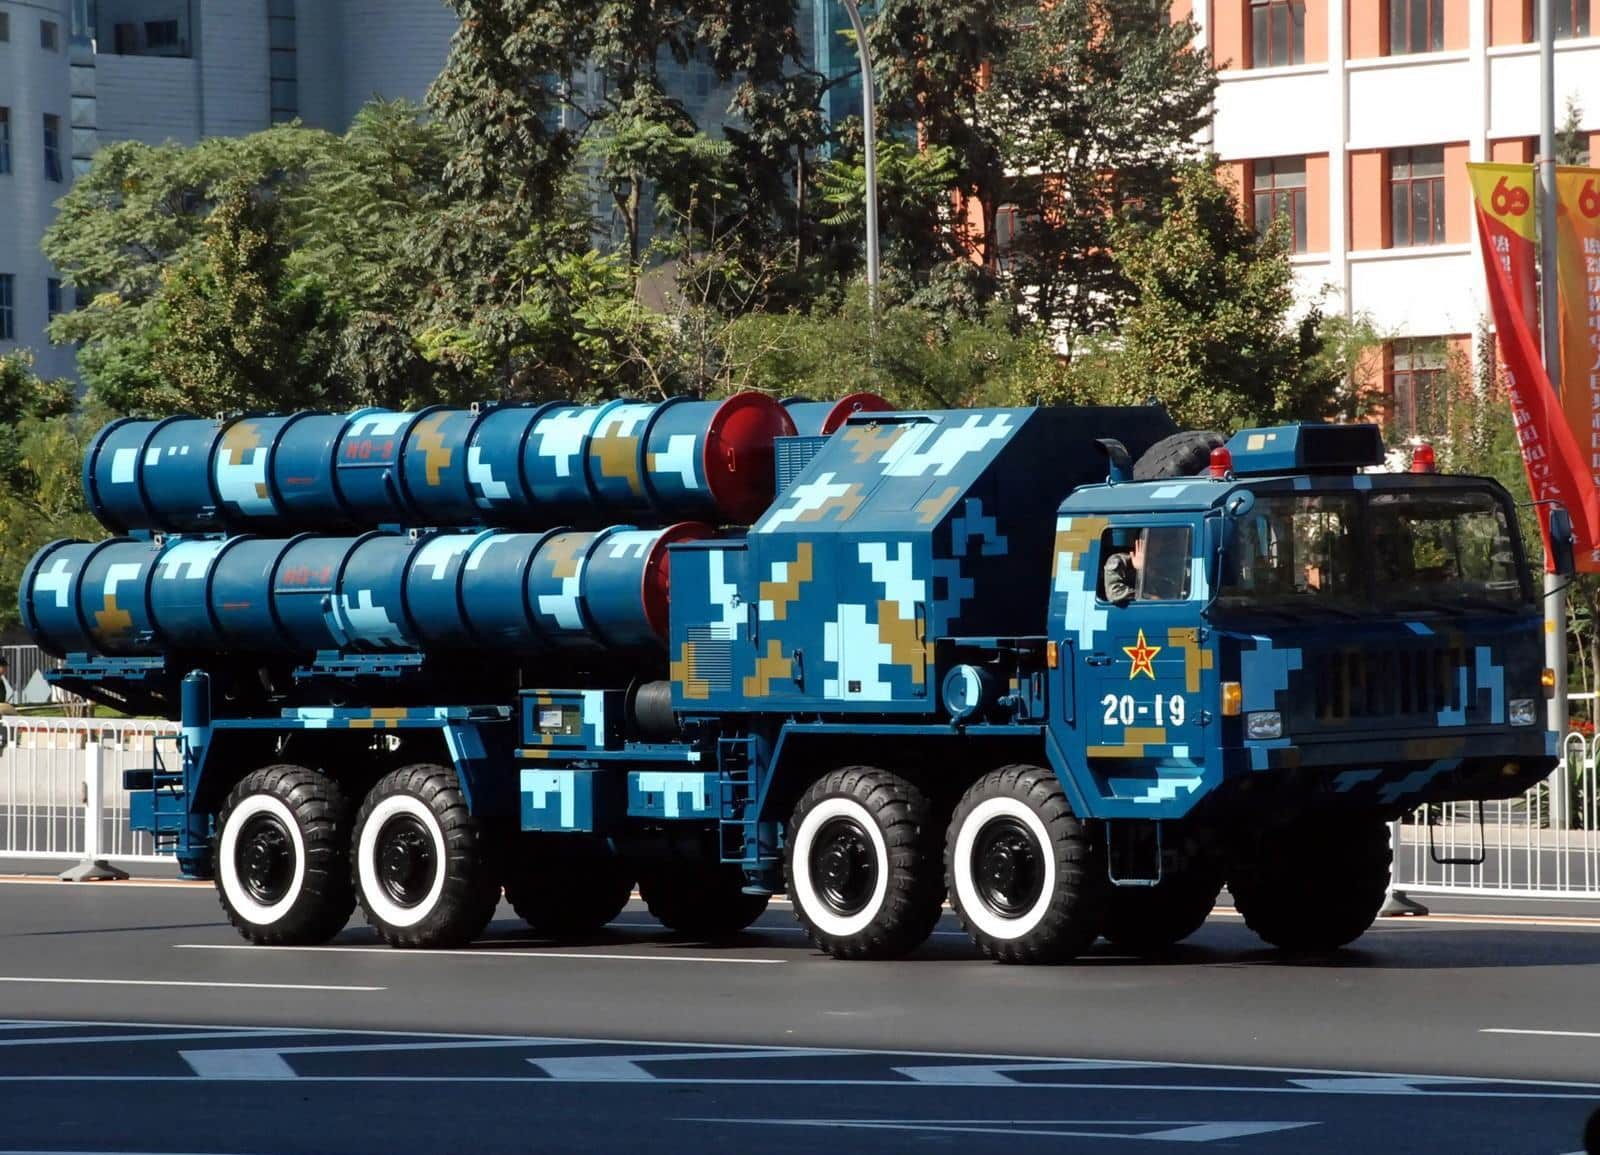 HQ-9: China's Advanced Air Defence System